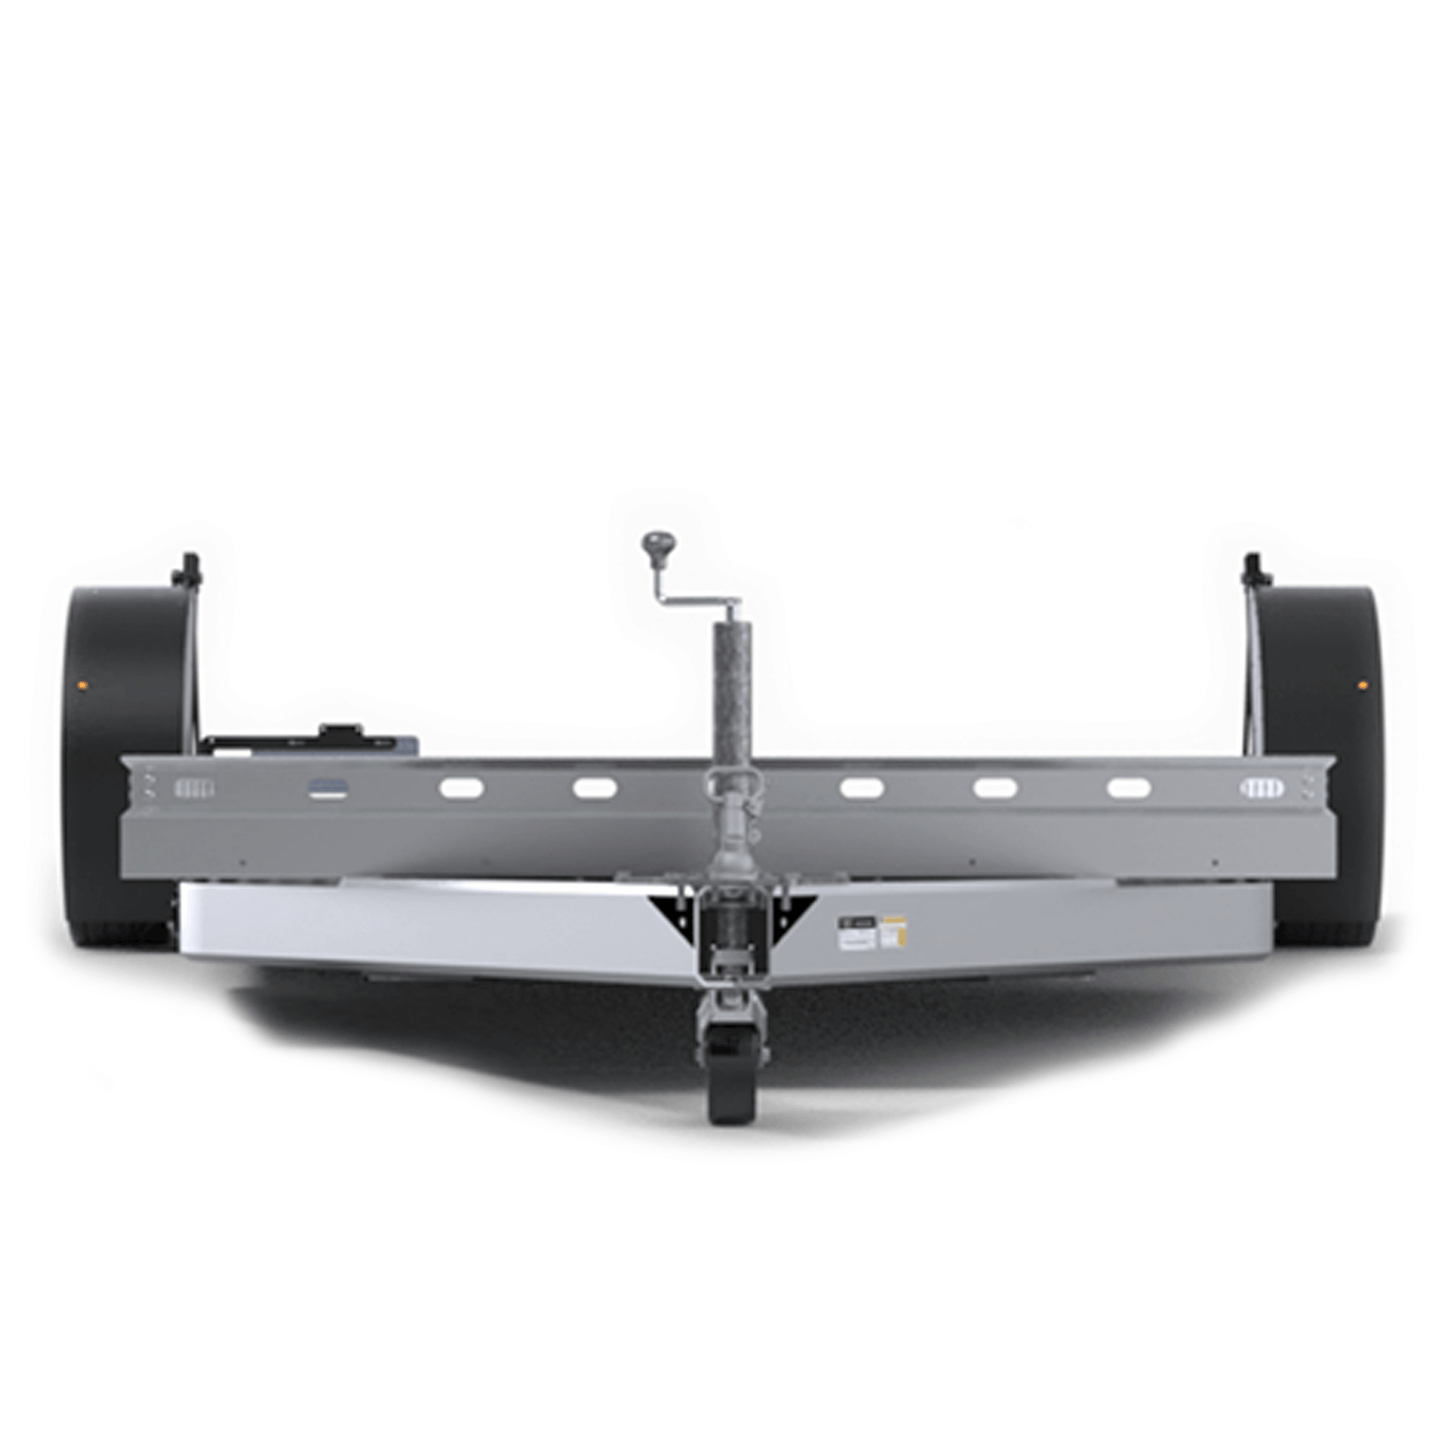 Club Sport Lowering Trailer from $17,895*